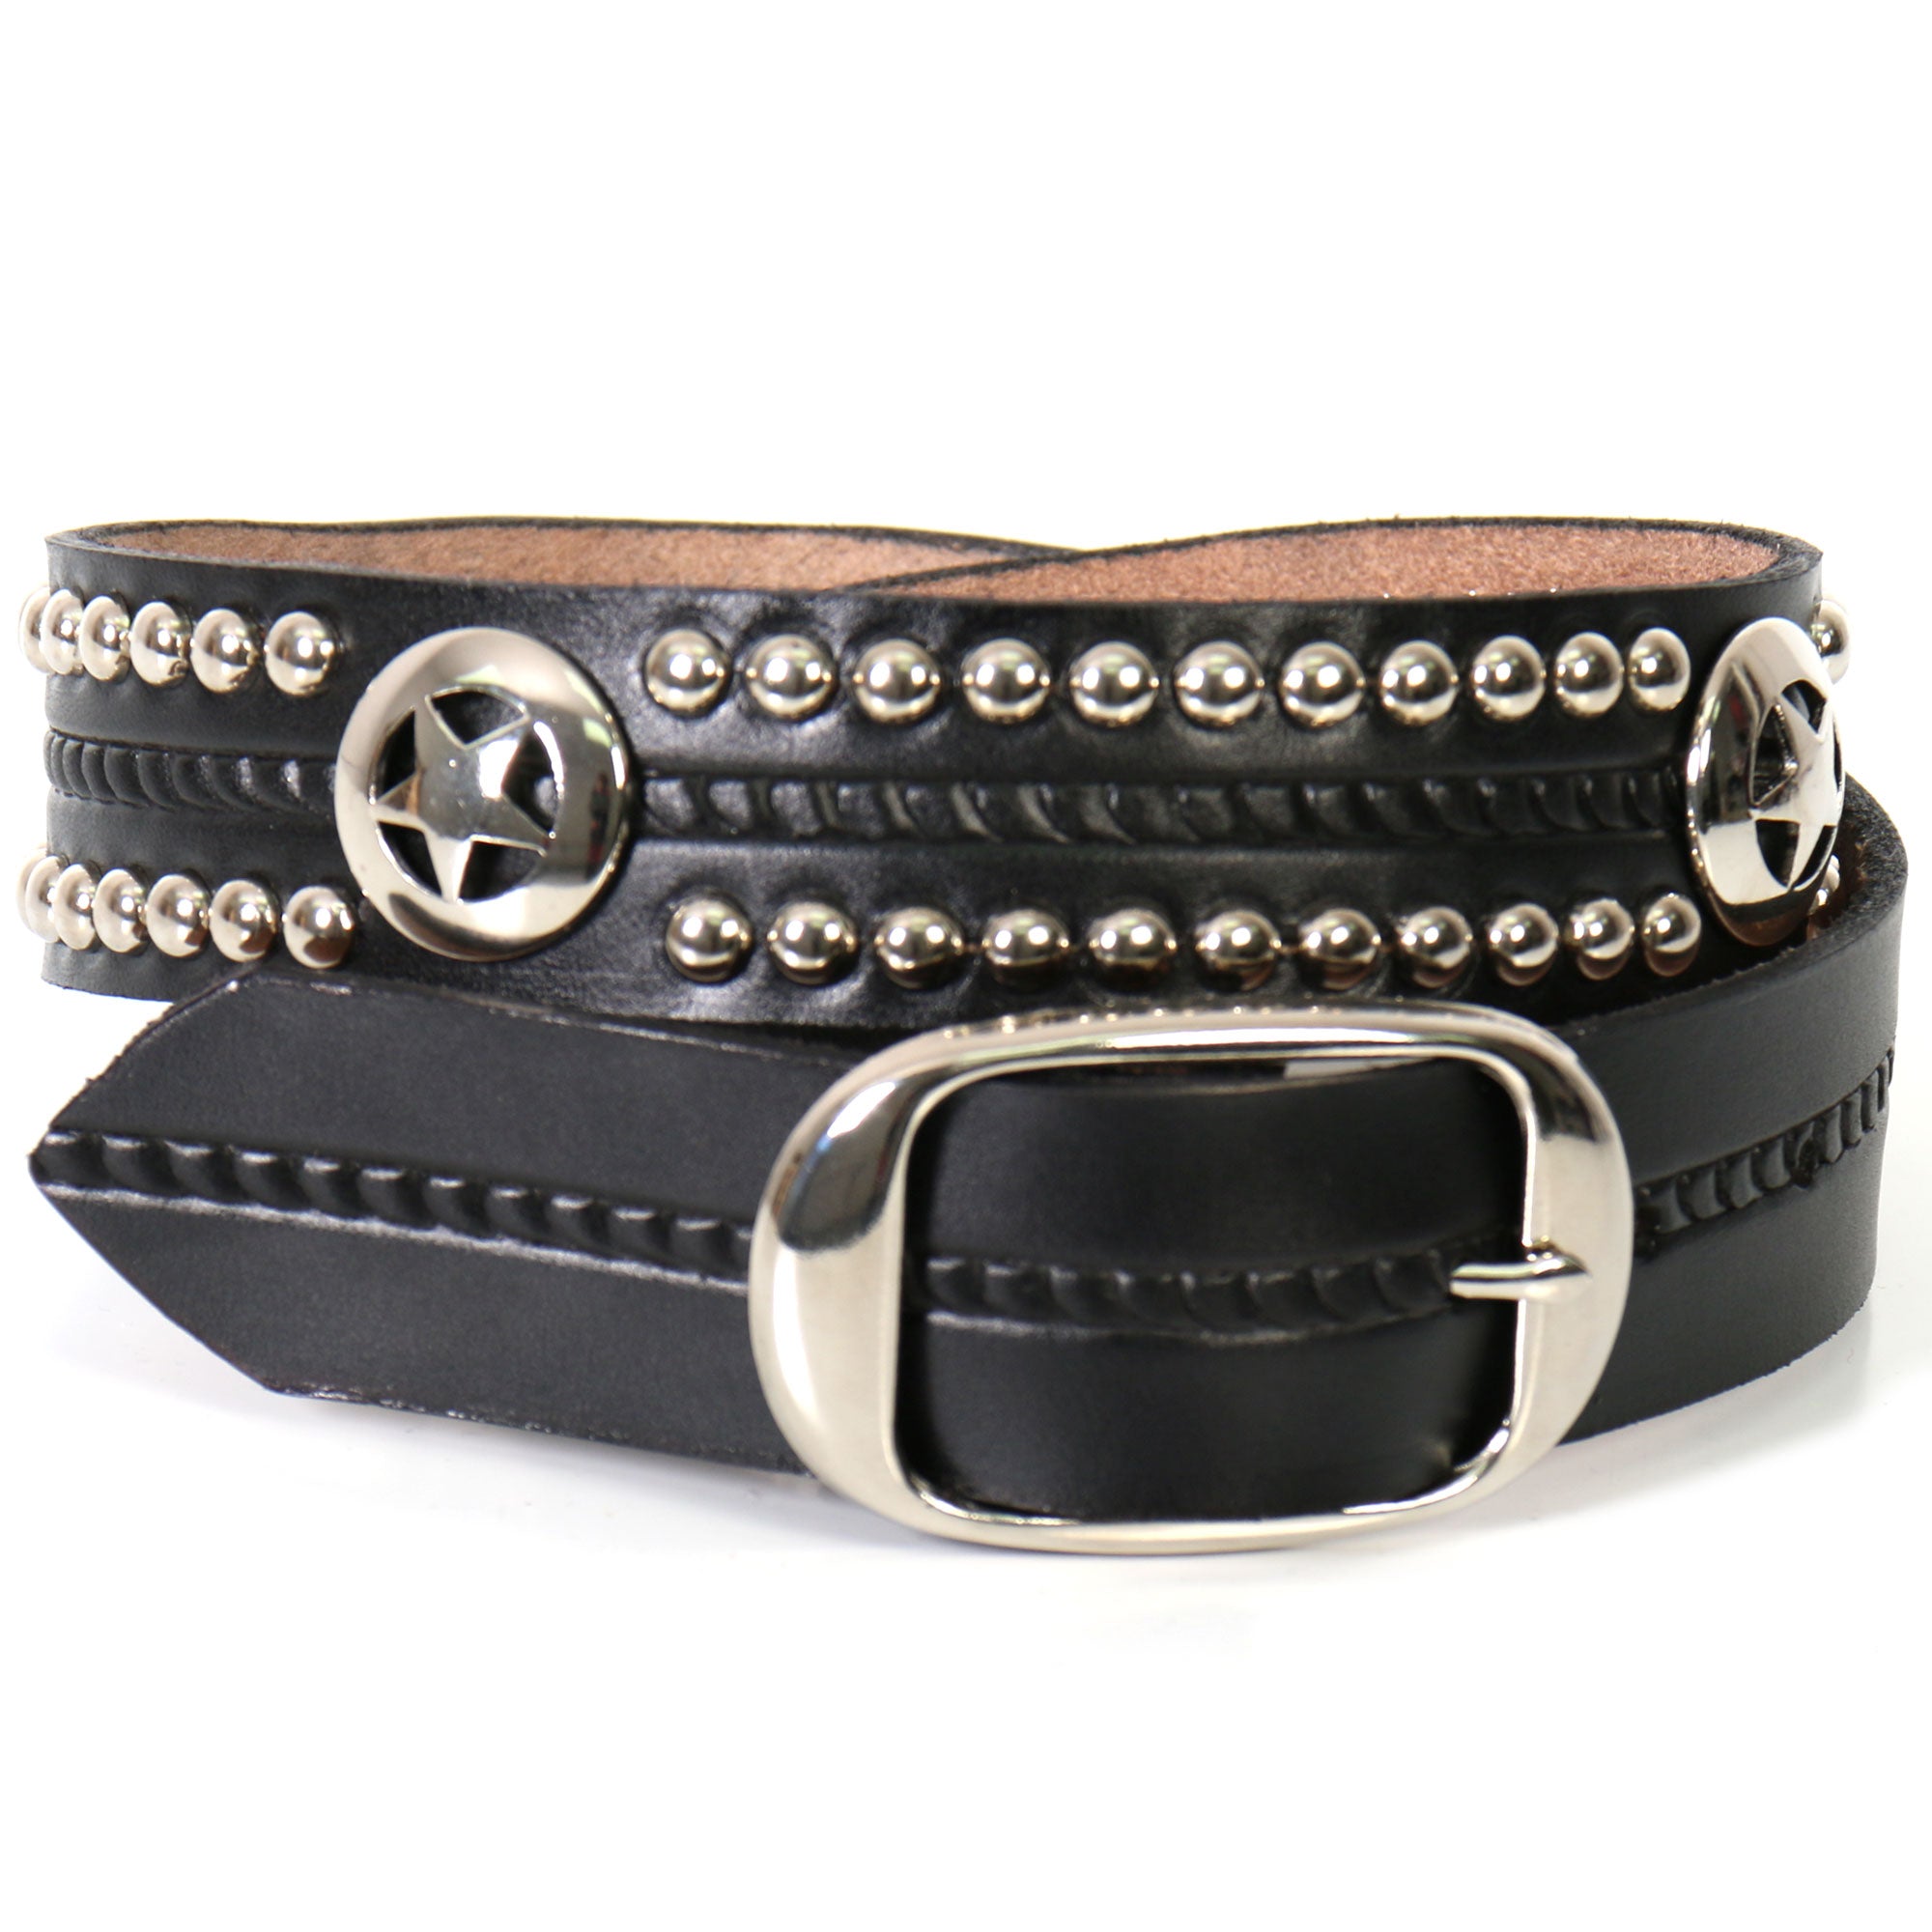 Hot Leathers Western Star and Studs Black Leather Belt BLE1010